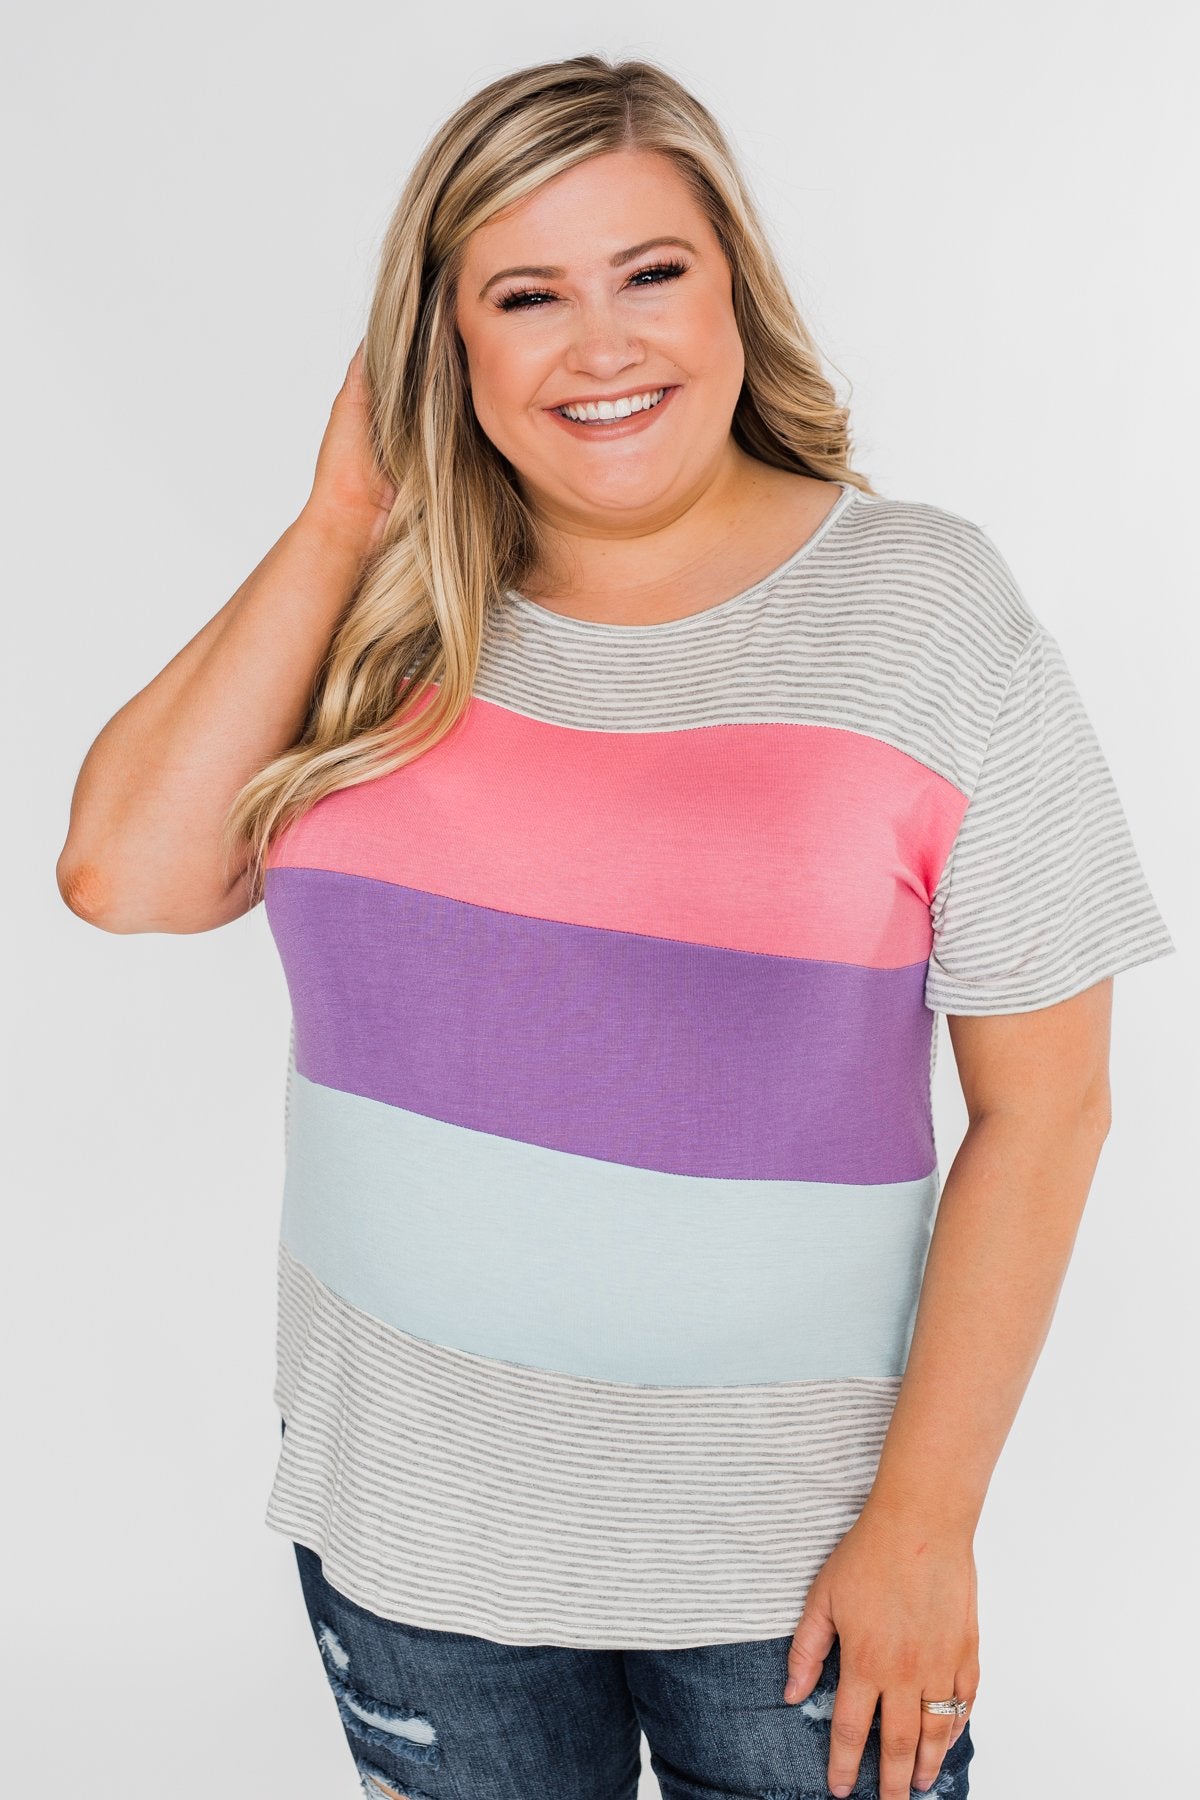 One Day At A Time Striped Color Block Top- Pink, Purple, Blue